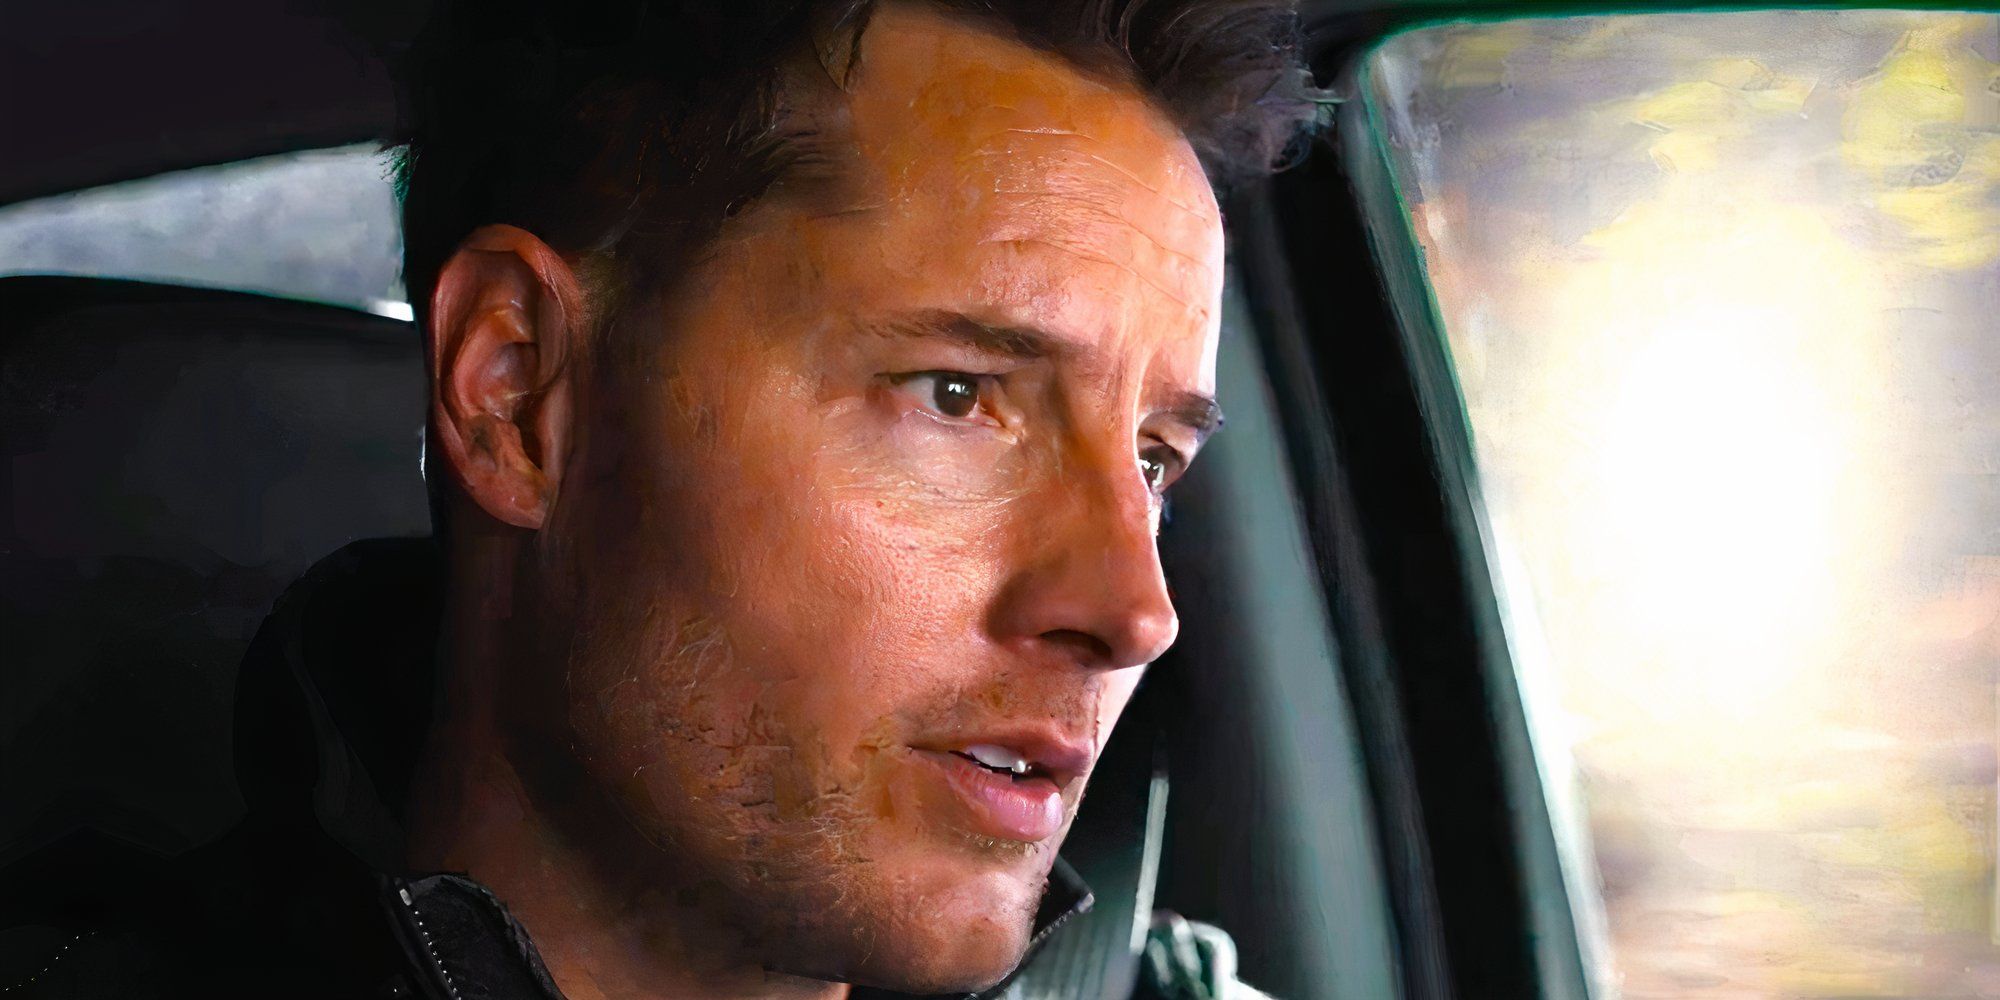 Justin Hartley as Colter Shaw driving in Tracker season 1 finale